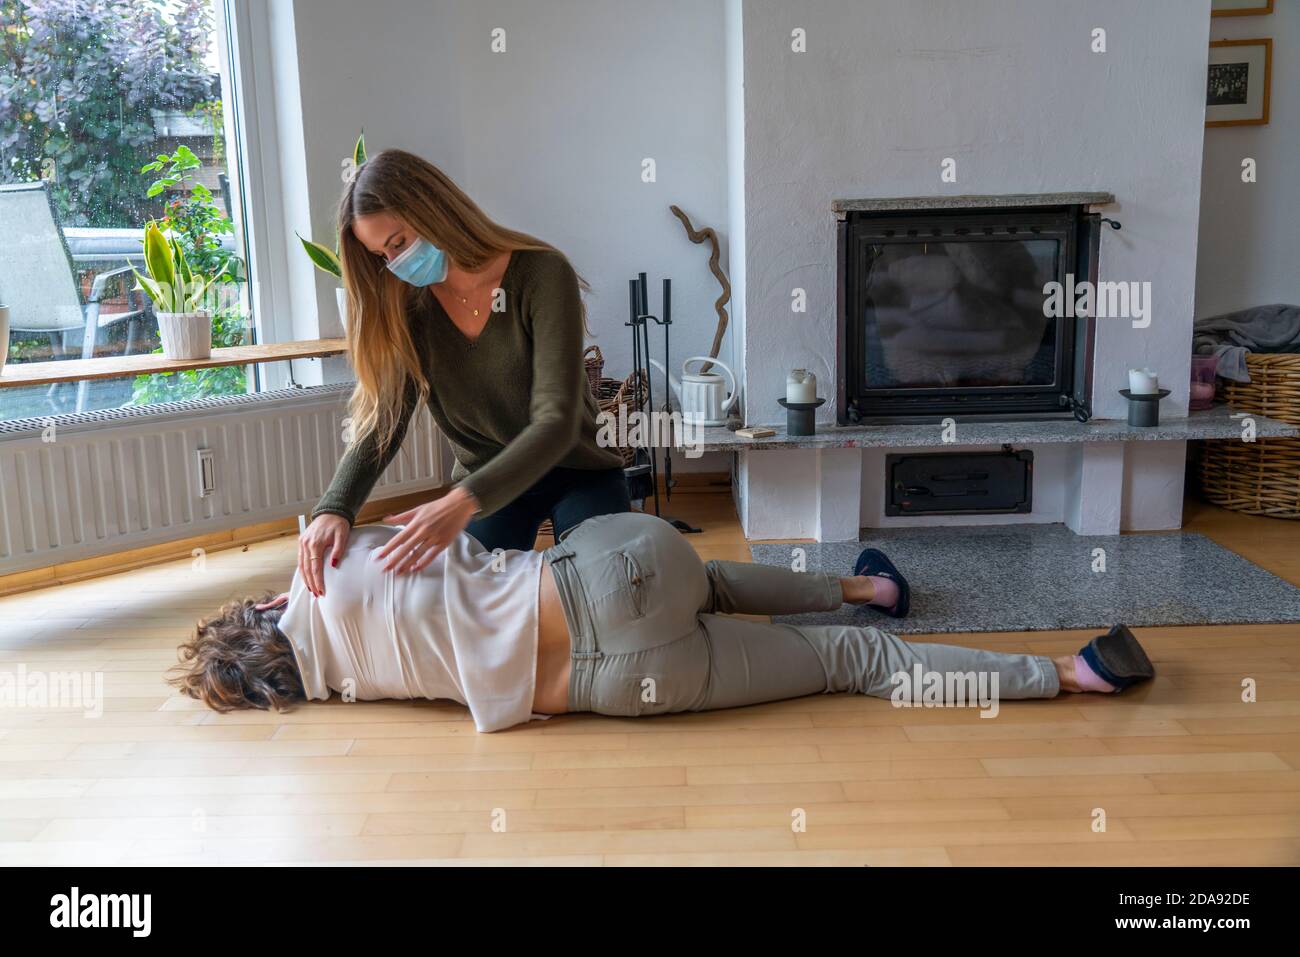 First aid measures under corona conditions, stable lateral position, after an accident in the home, with a mouth and nose mask, when first aid is give Stock Photo